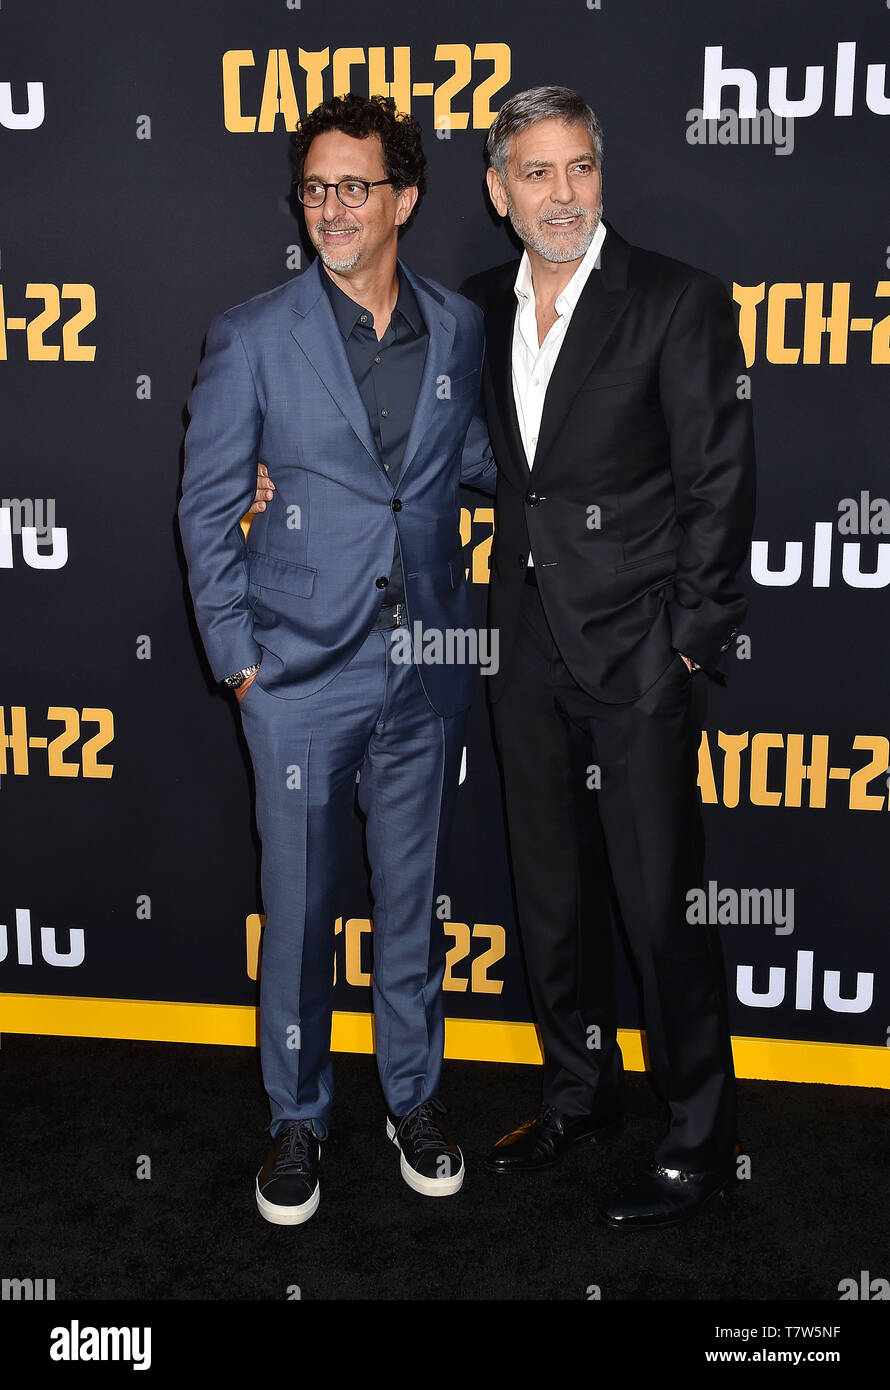 HOLLYWOOD, CA - MAY 07: Grant Heslov (L) and George Clooney arrive at the U.S. Premiere Of Hulu's 'Catch-22' at TCL Chinese Theatre on May 07, 2019 in Hollywood, California. Stock Photo